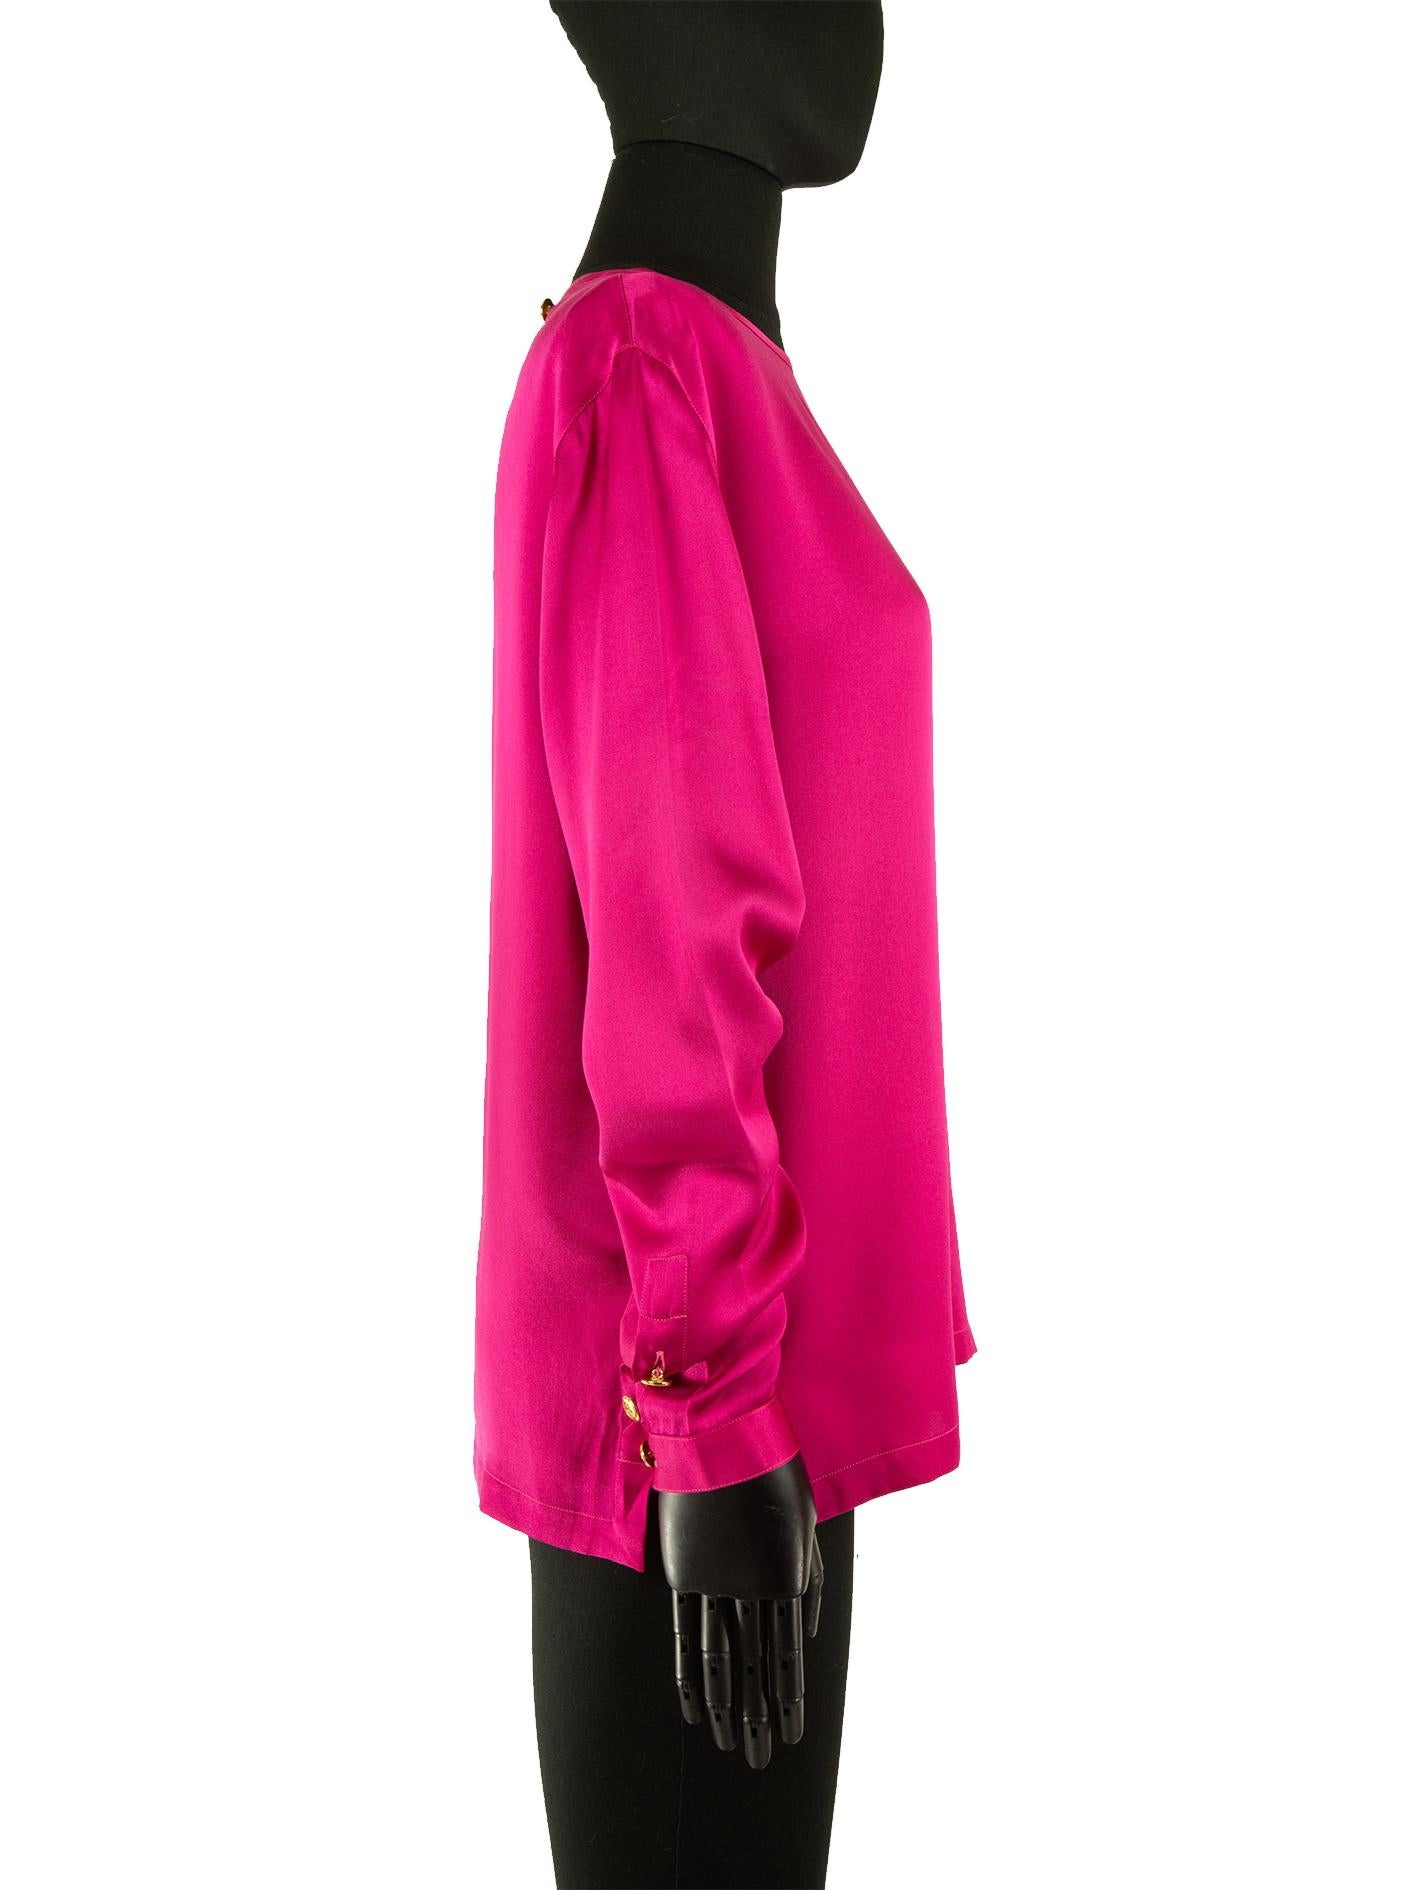 Chanel Hot Pink Satin Top In Good Condition For Sale In London, GB